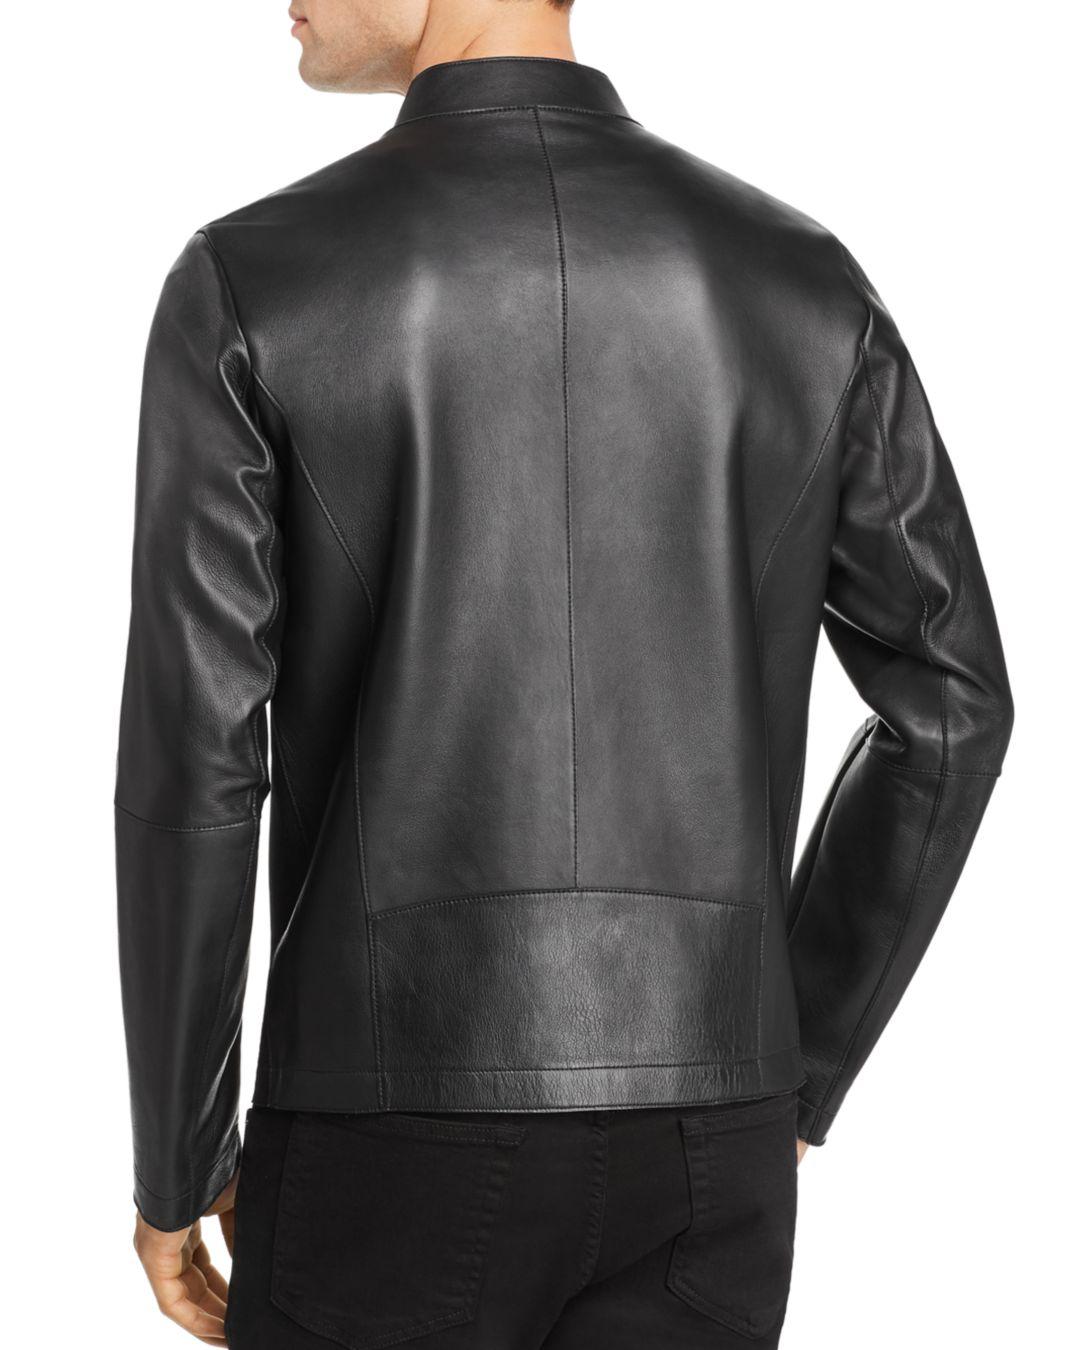 Karl Lagerfeld Double - Faced Leather Jacket in Black for Men - Lyst